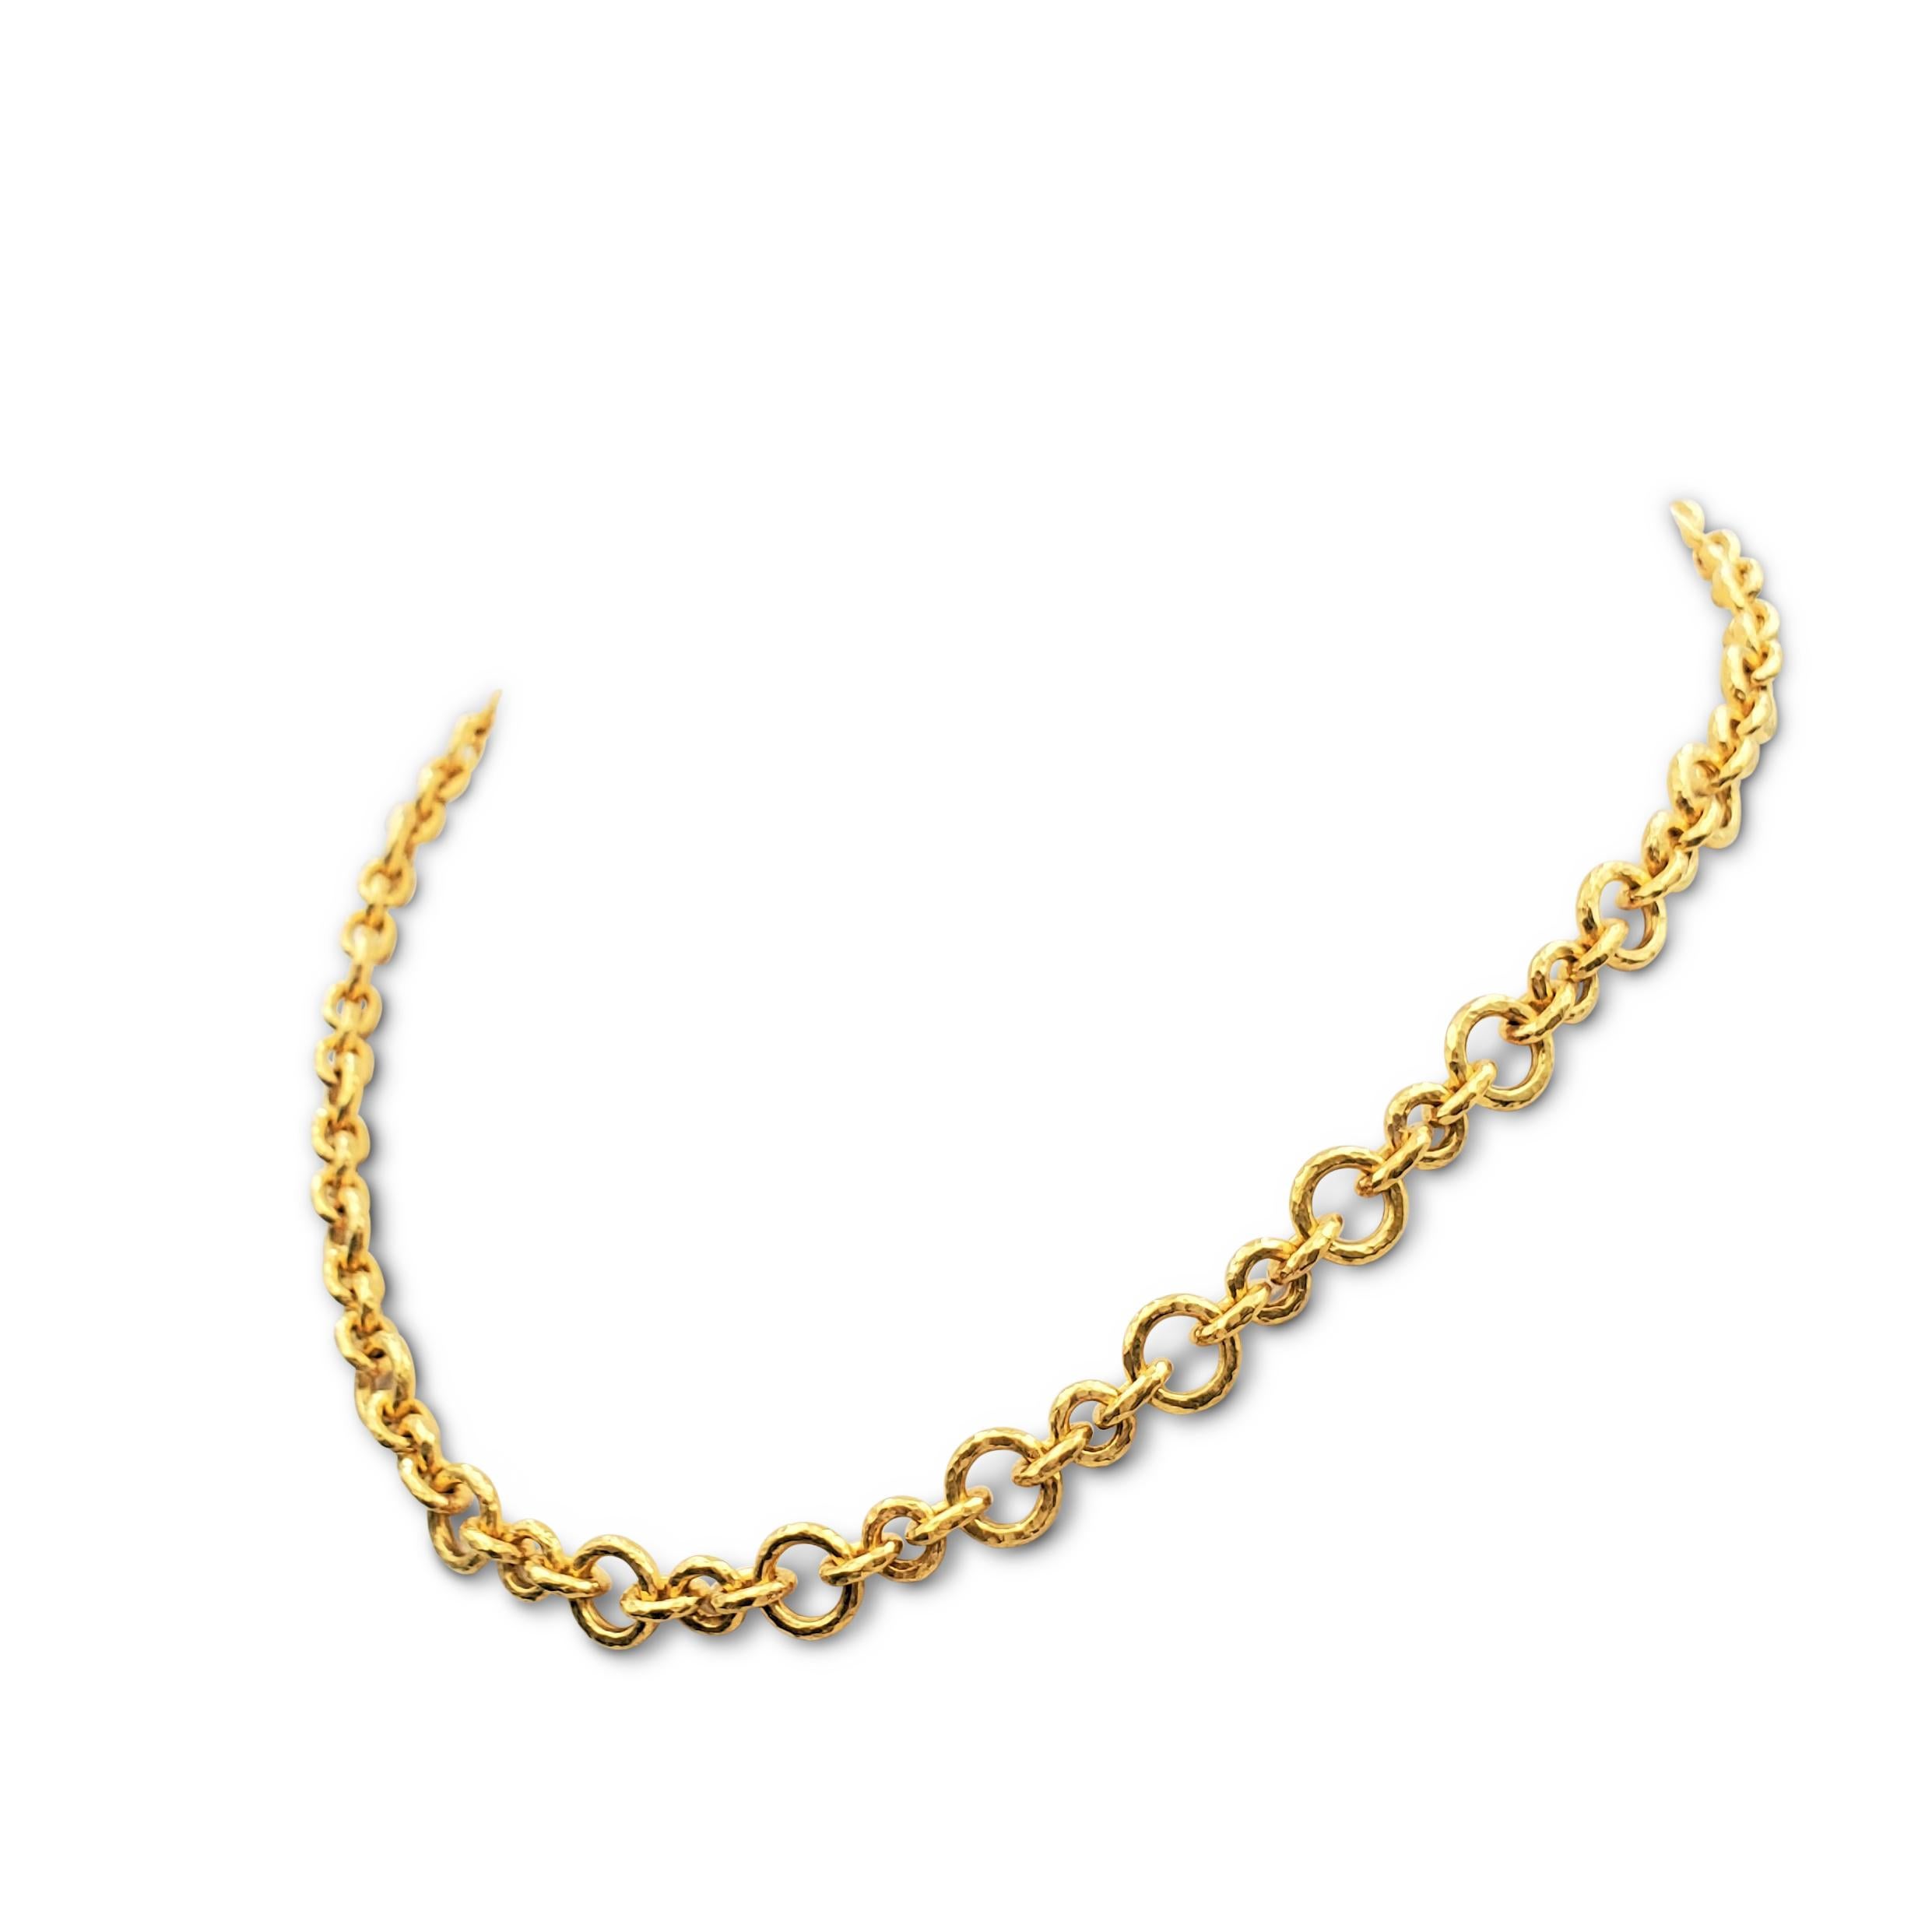 Authentic Elizabeth Locke necklace crafted in lustrous hammered 19 karat gold is comprised of interlocking round links. Granulated end-caps detail the toggle closure. Signed EL, 19K. The necklace measures 17 inches in length. Not presented with the